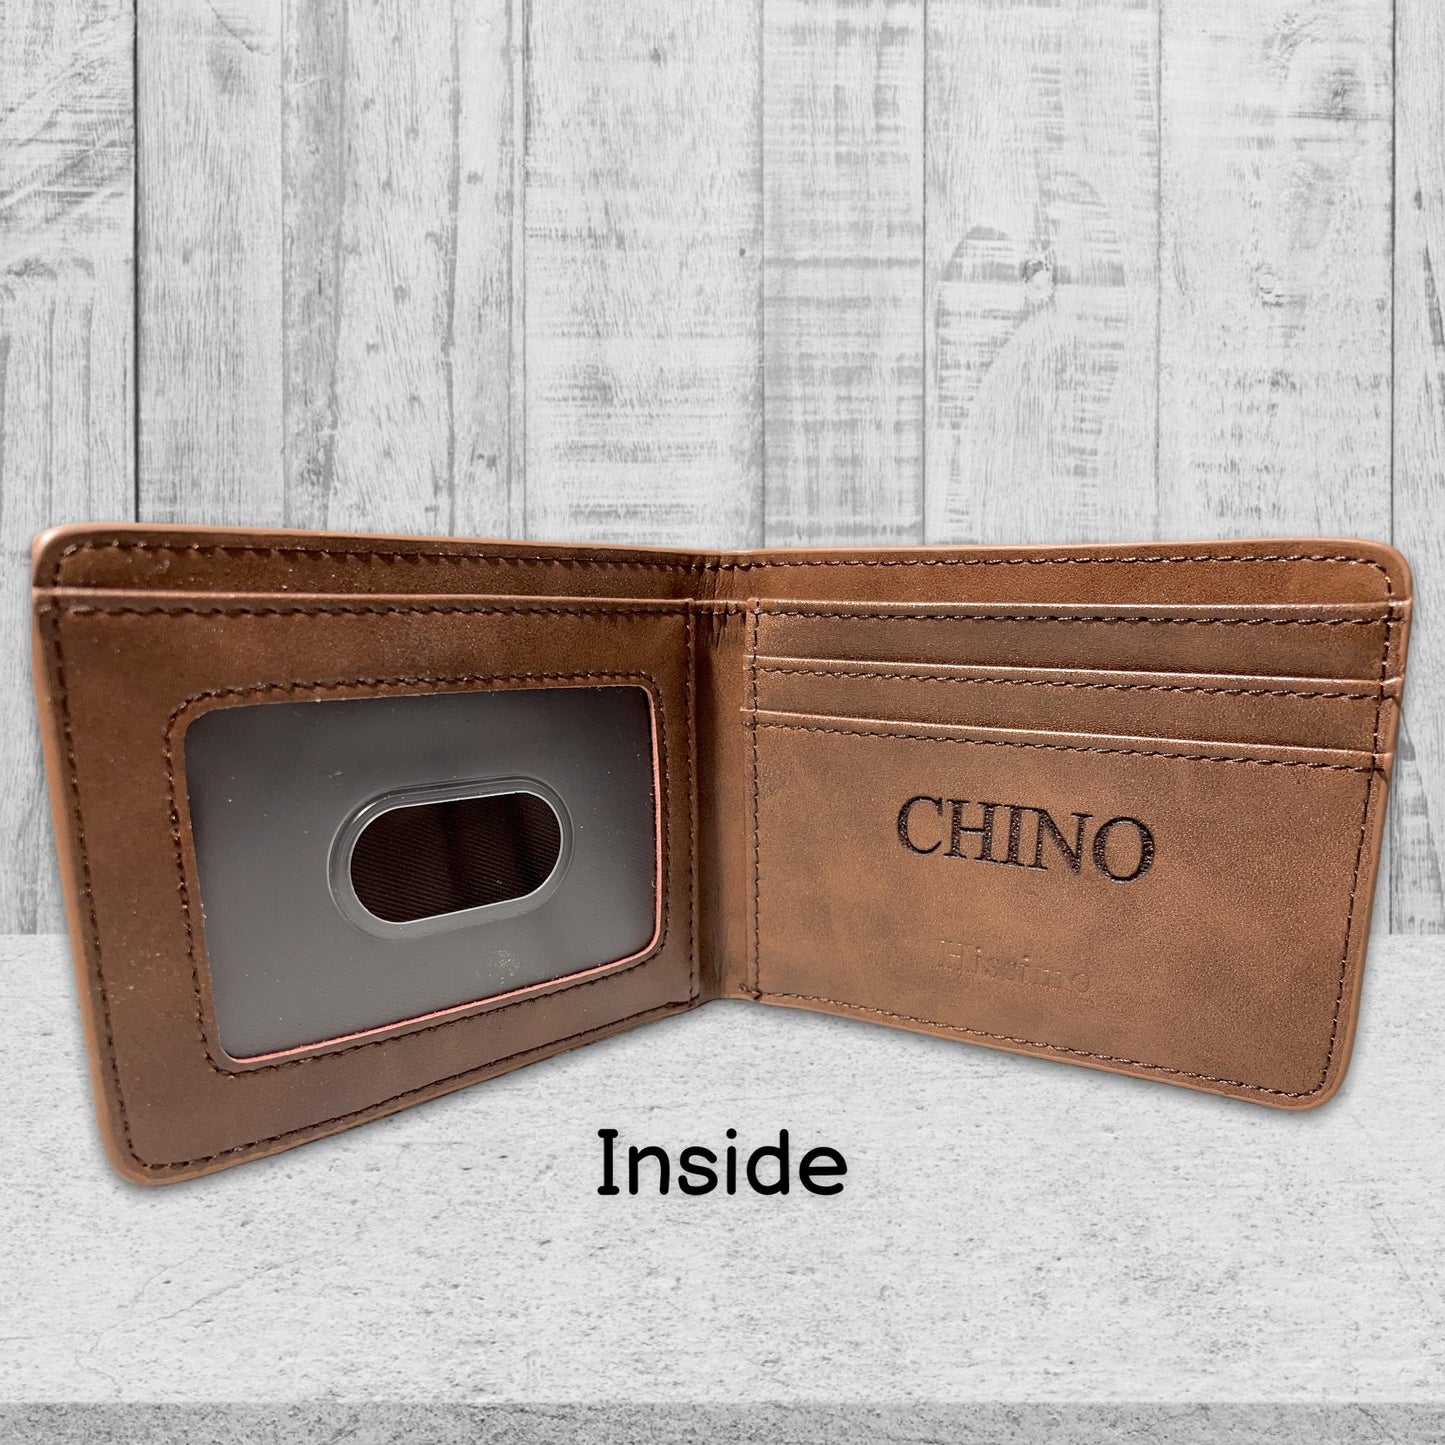 Wallet interior with text engraving.